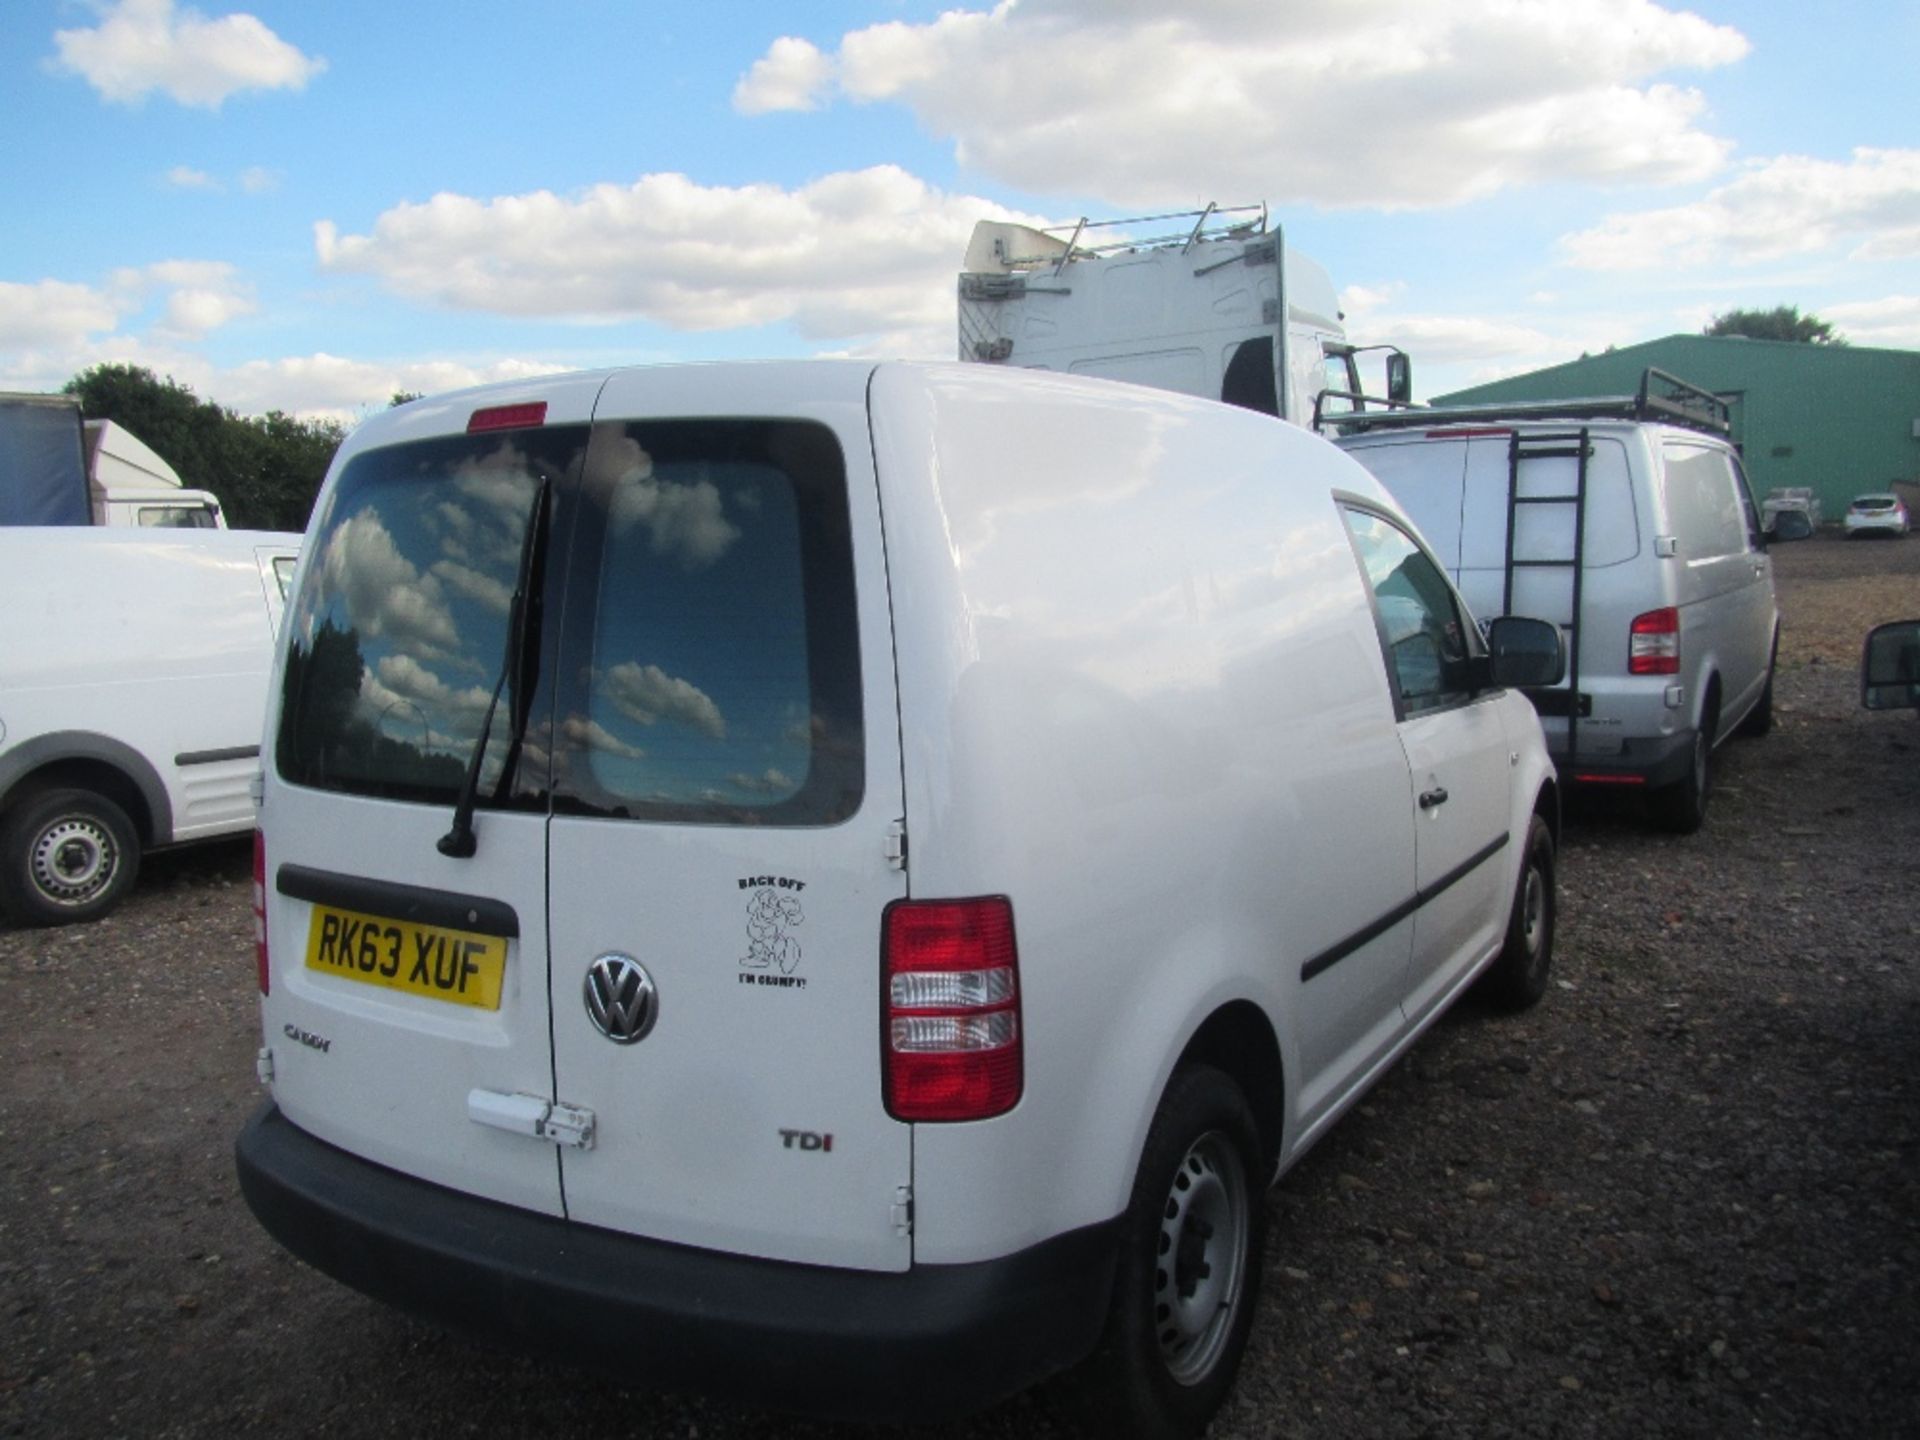 2013 VW Caddy C20 Startline TDI 5 Speed Manual Panel Van. Registration Documents will be supplied. - Image 4 of 5